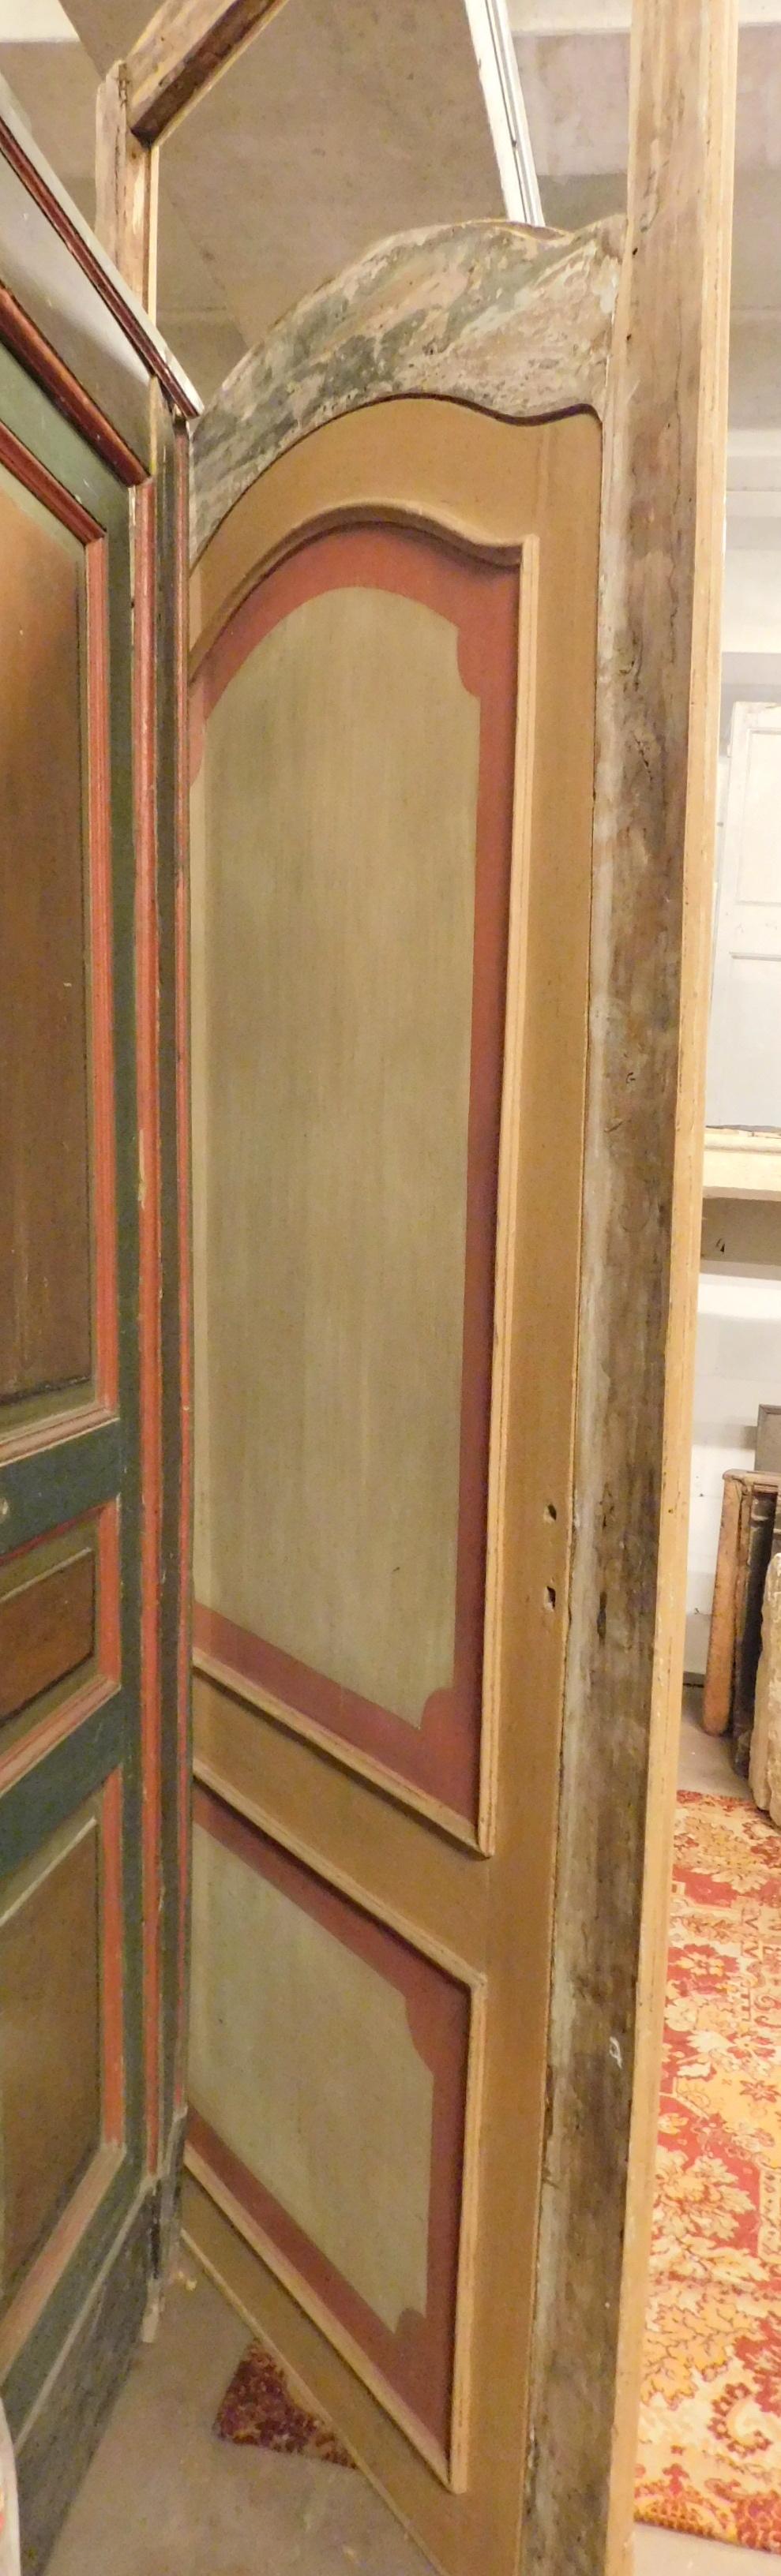 Poplar Set of 6 Identical Doors, Lacquered with Frame and Overdoor, 18th Century Italy For Sale